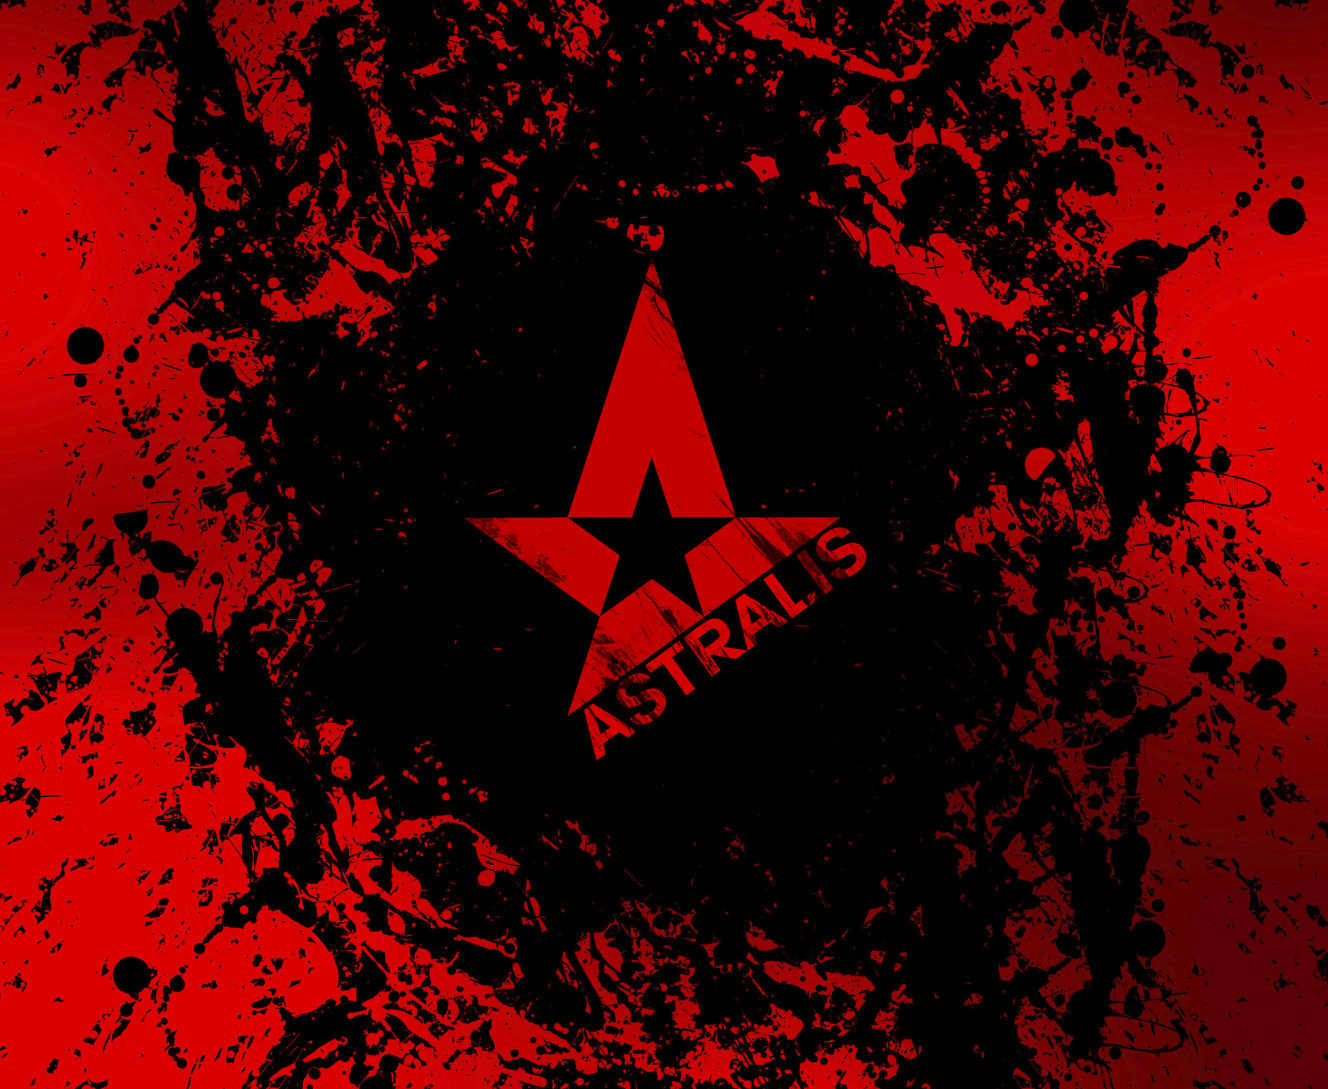 Counter-Strike: Global Offensive - Mouse Pad - Astralis [12] - Mfest